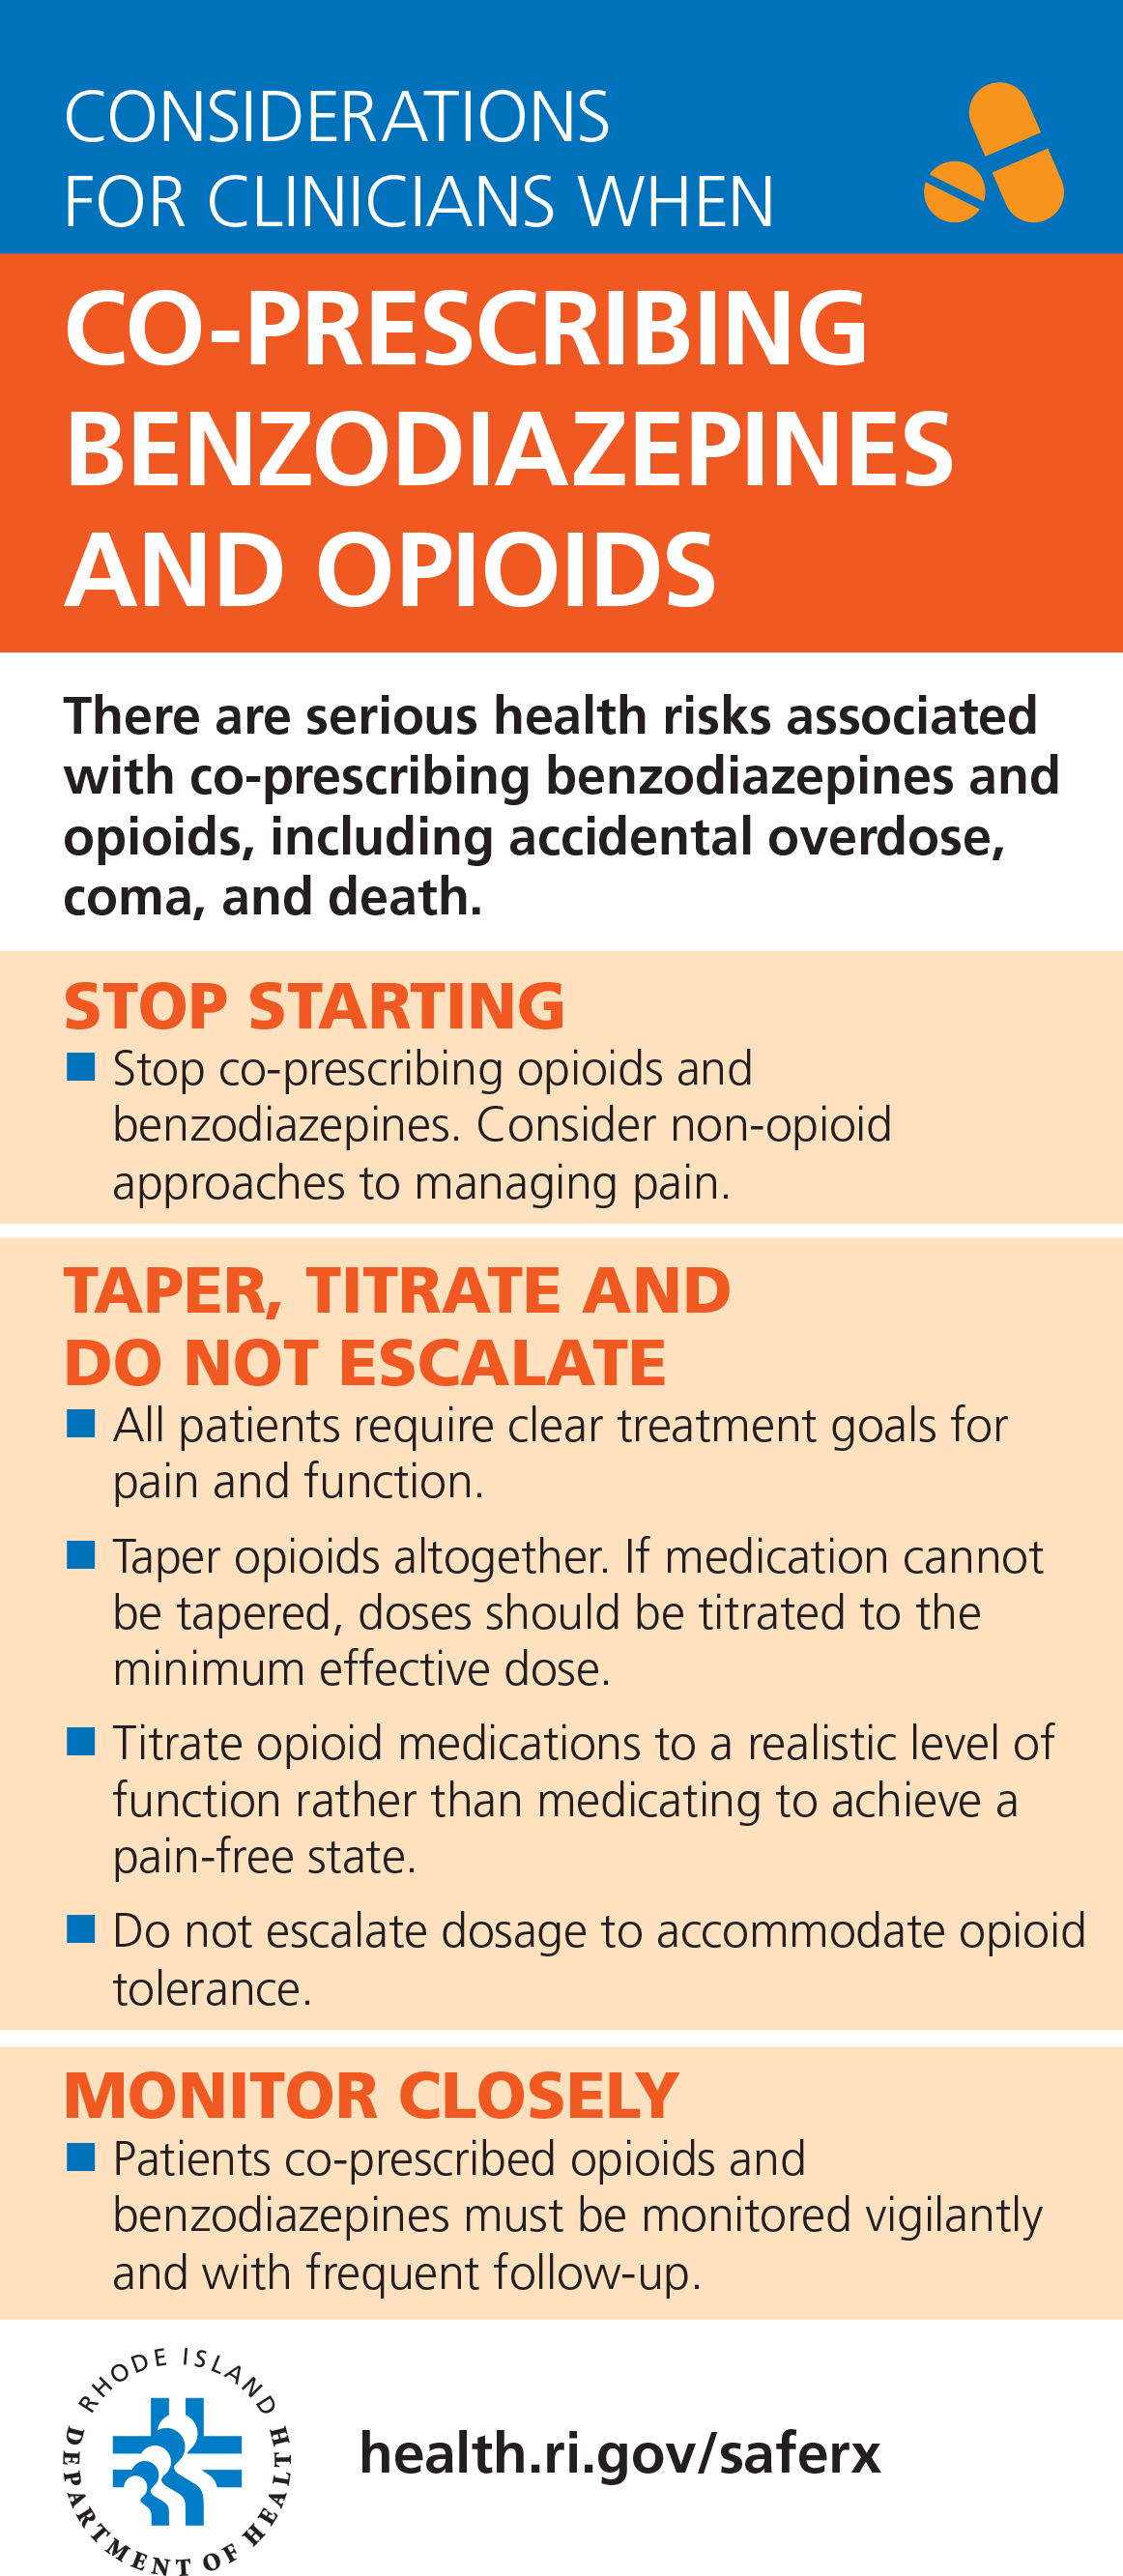 Considerations for Clinicians when co-prescribing Benzodiazepines and Opioids